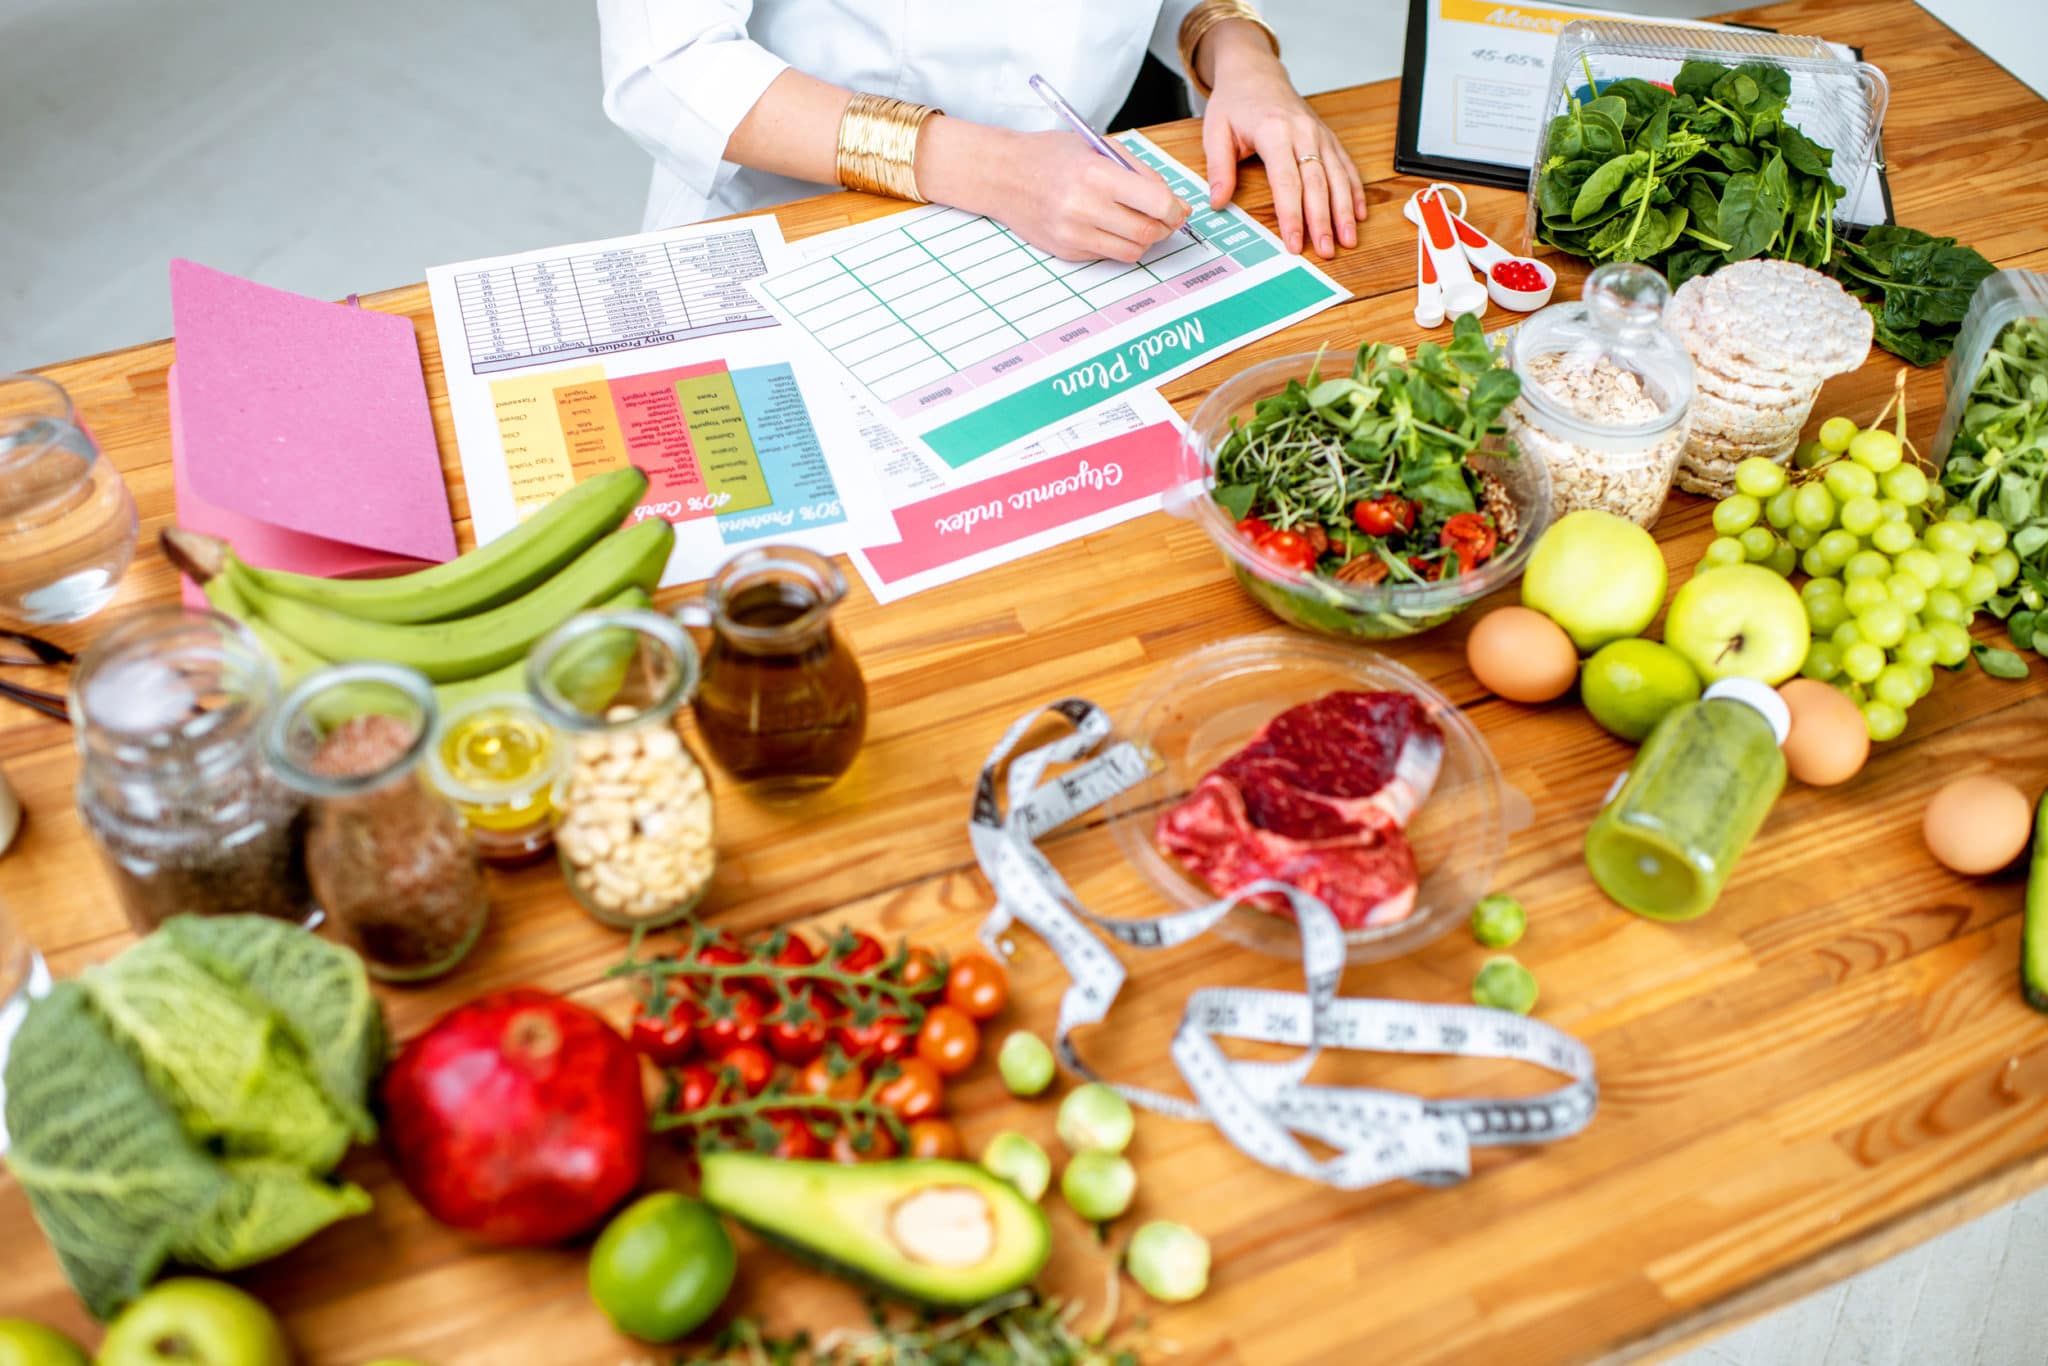 A woman consults with nutrition professionals at a table surrounded by fruits and vegetables.